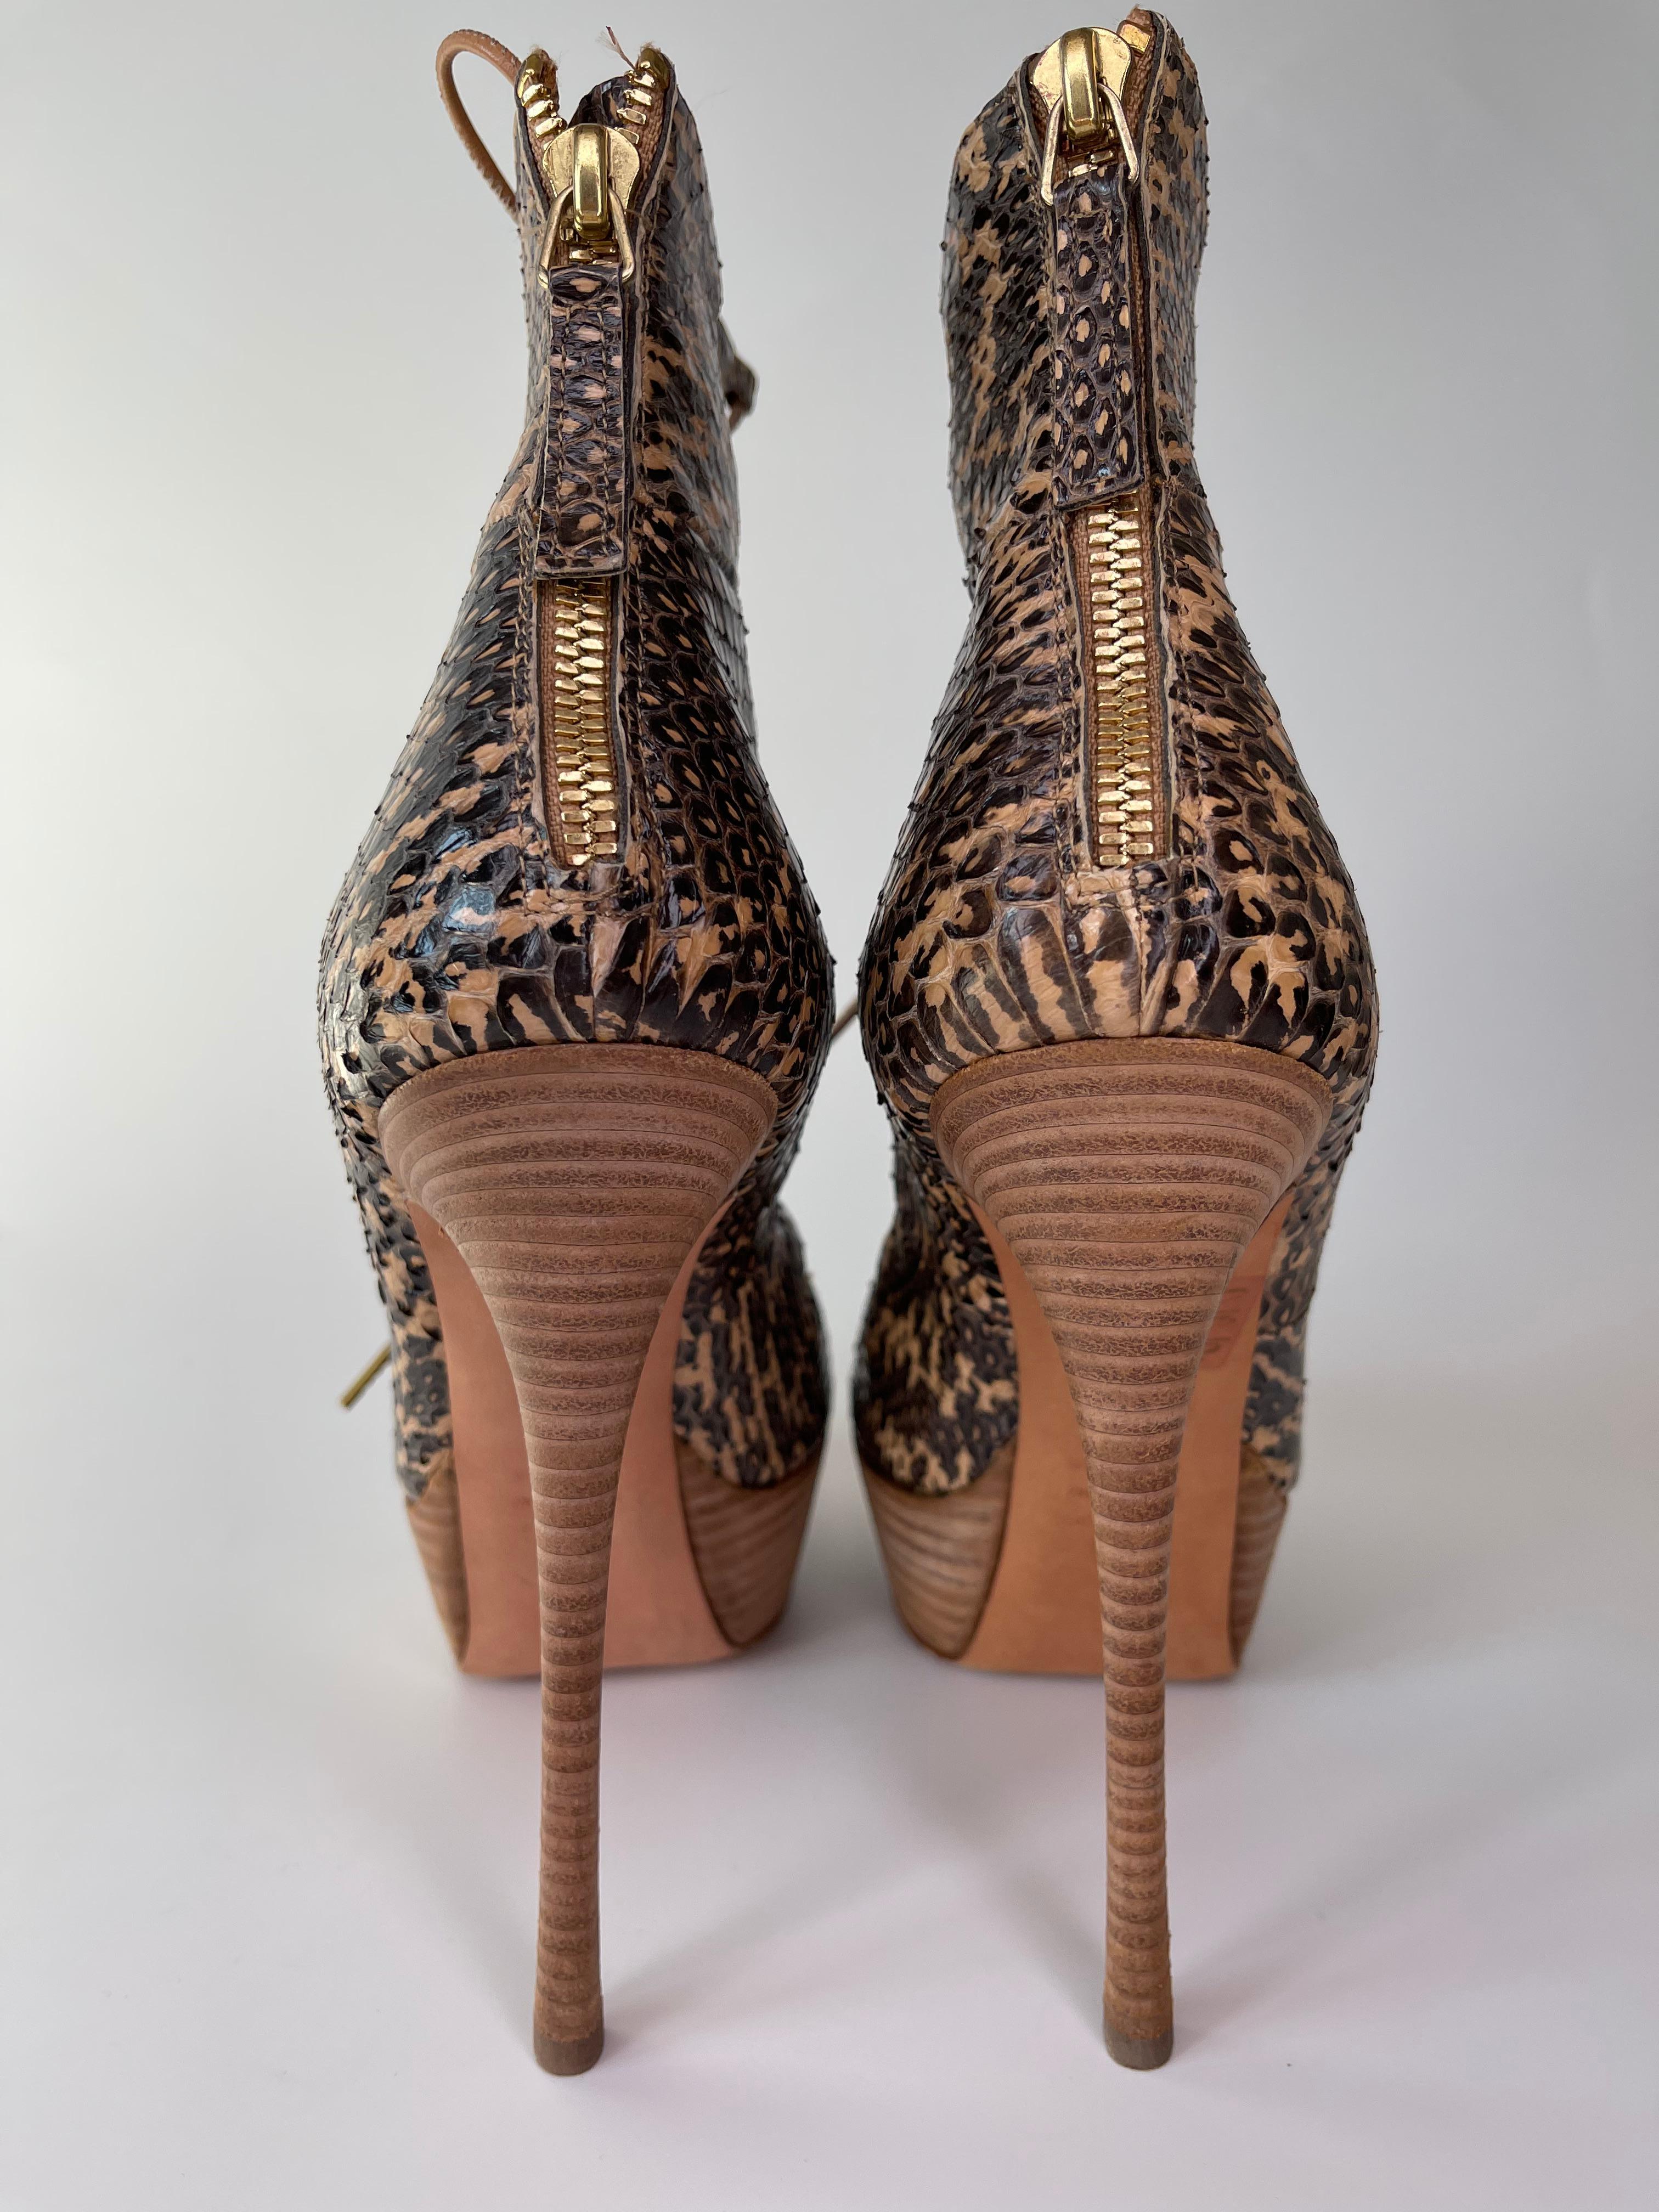 Alexander McQueen Optic Snake Nappa London Sand Russet Stiletto (39.5 EU) In Good Condition For Sale In Montreal, Quebec